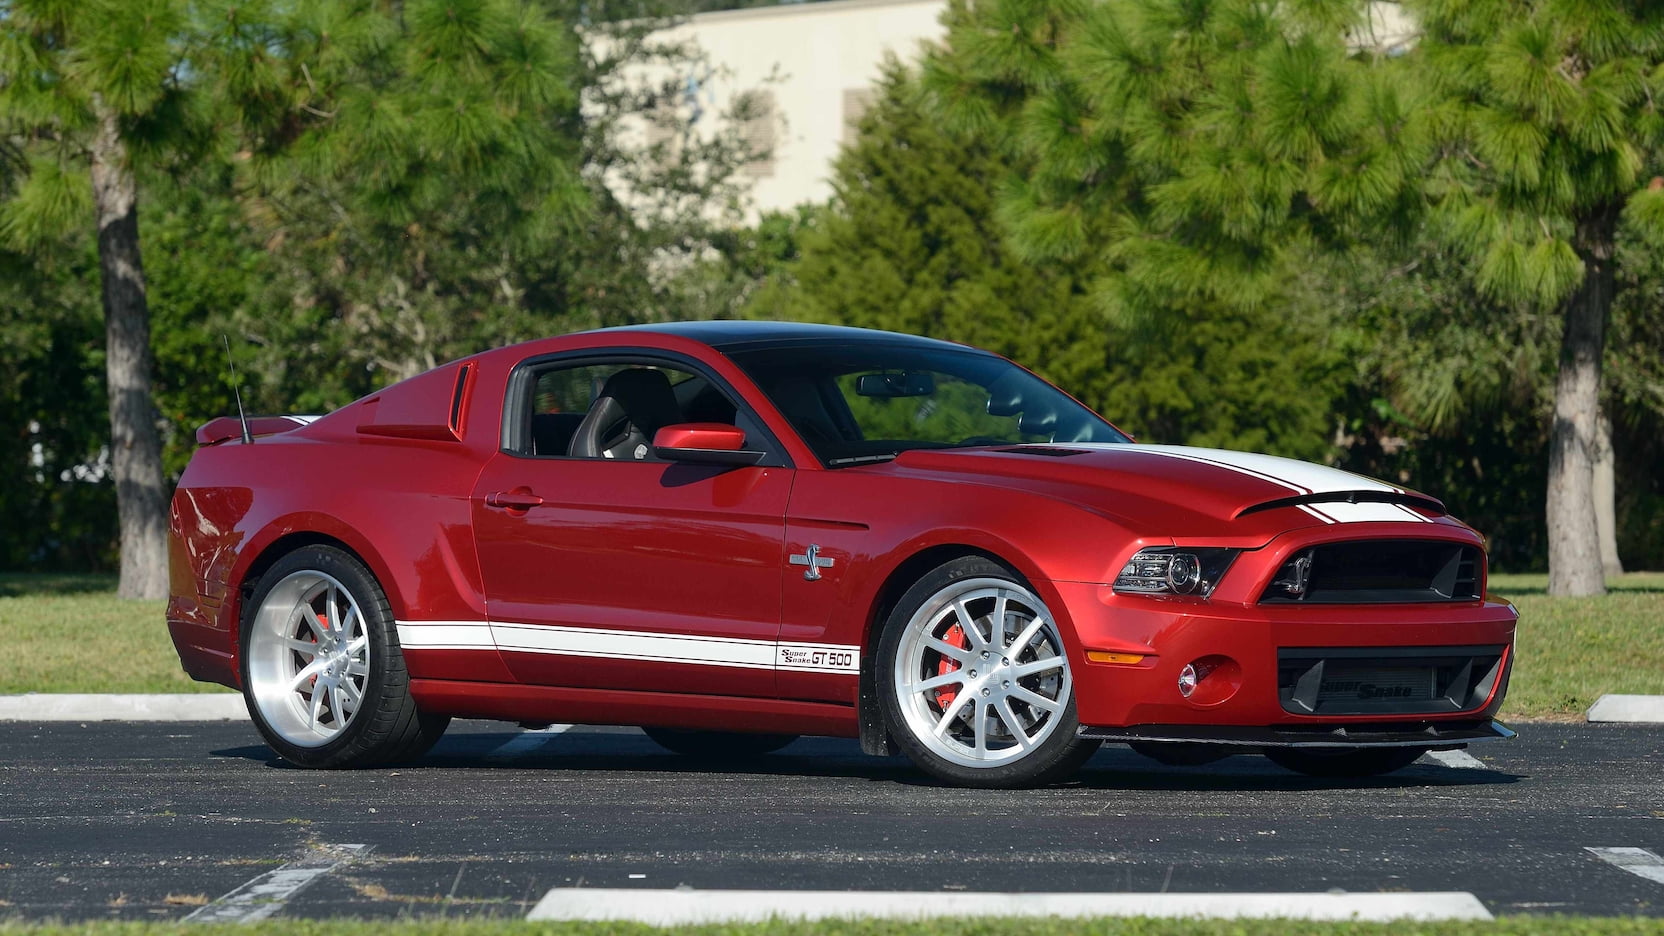 Mustang Of The Day: 2013 Ford Mustang Shelby GT500 Super Snake